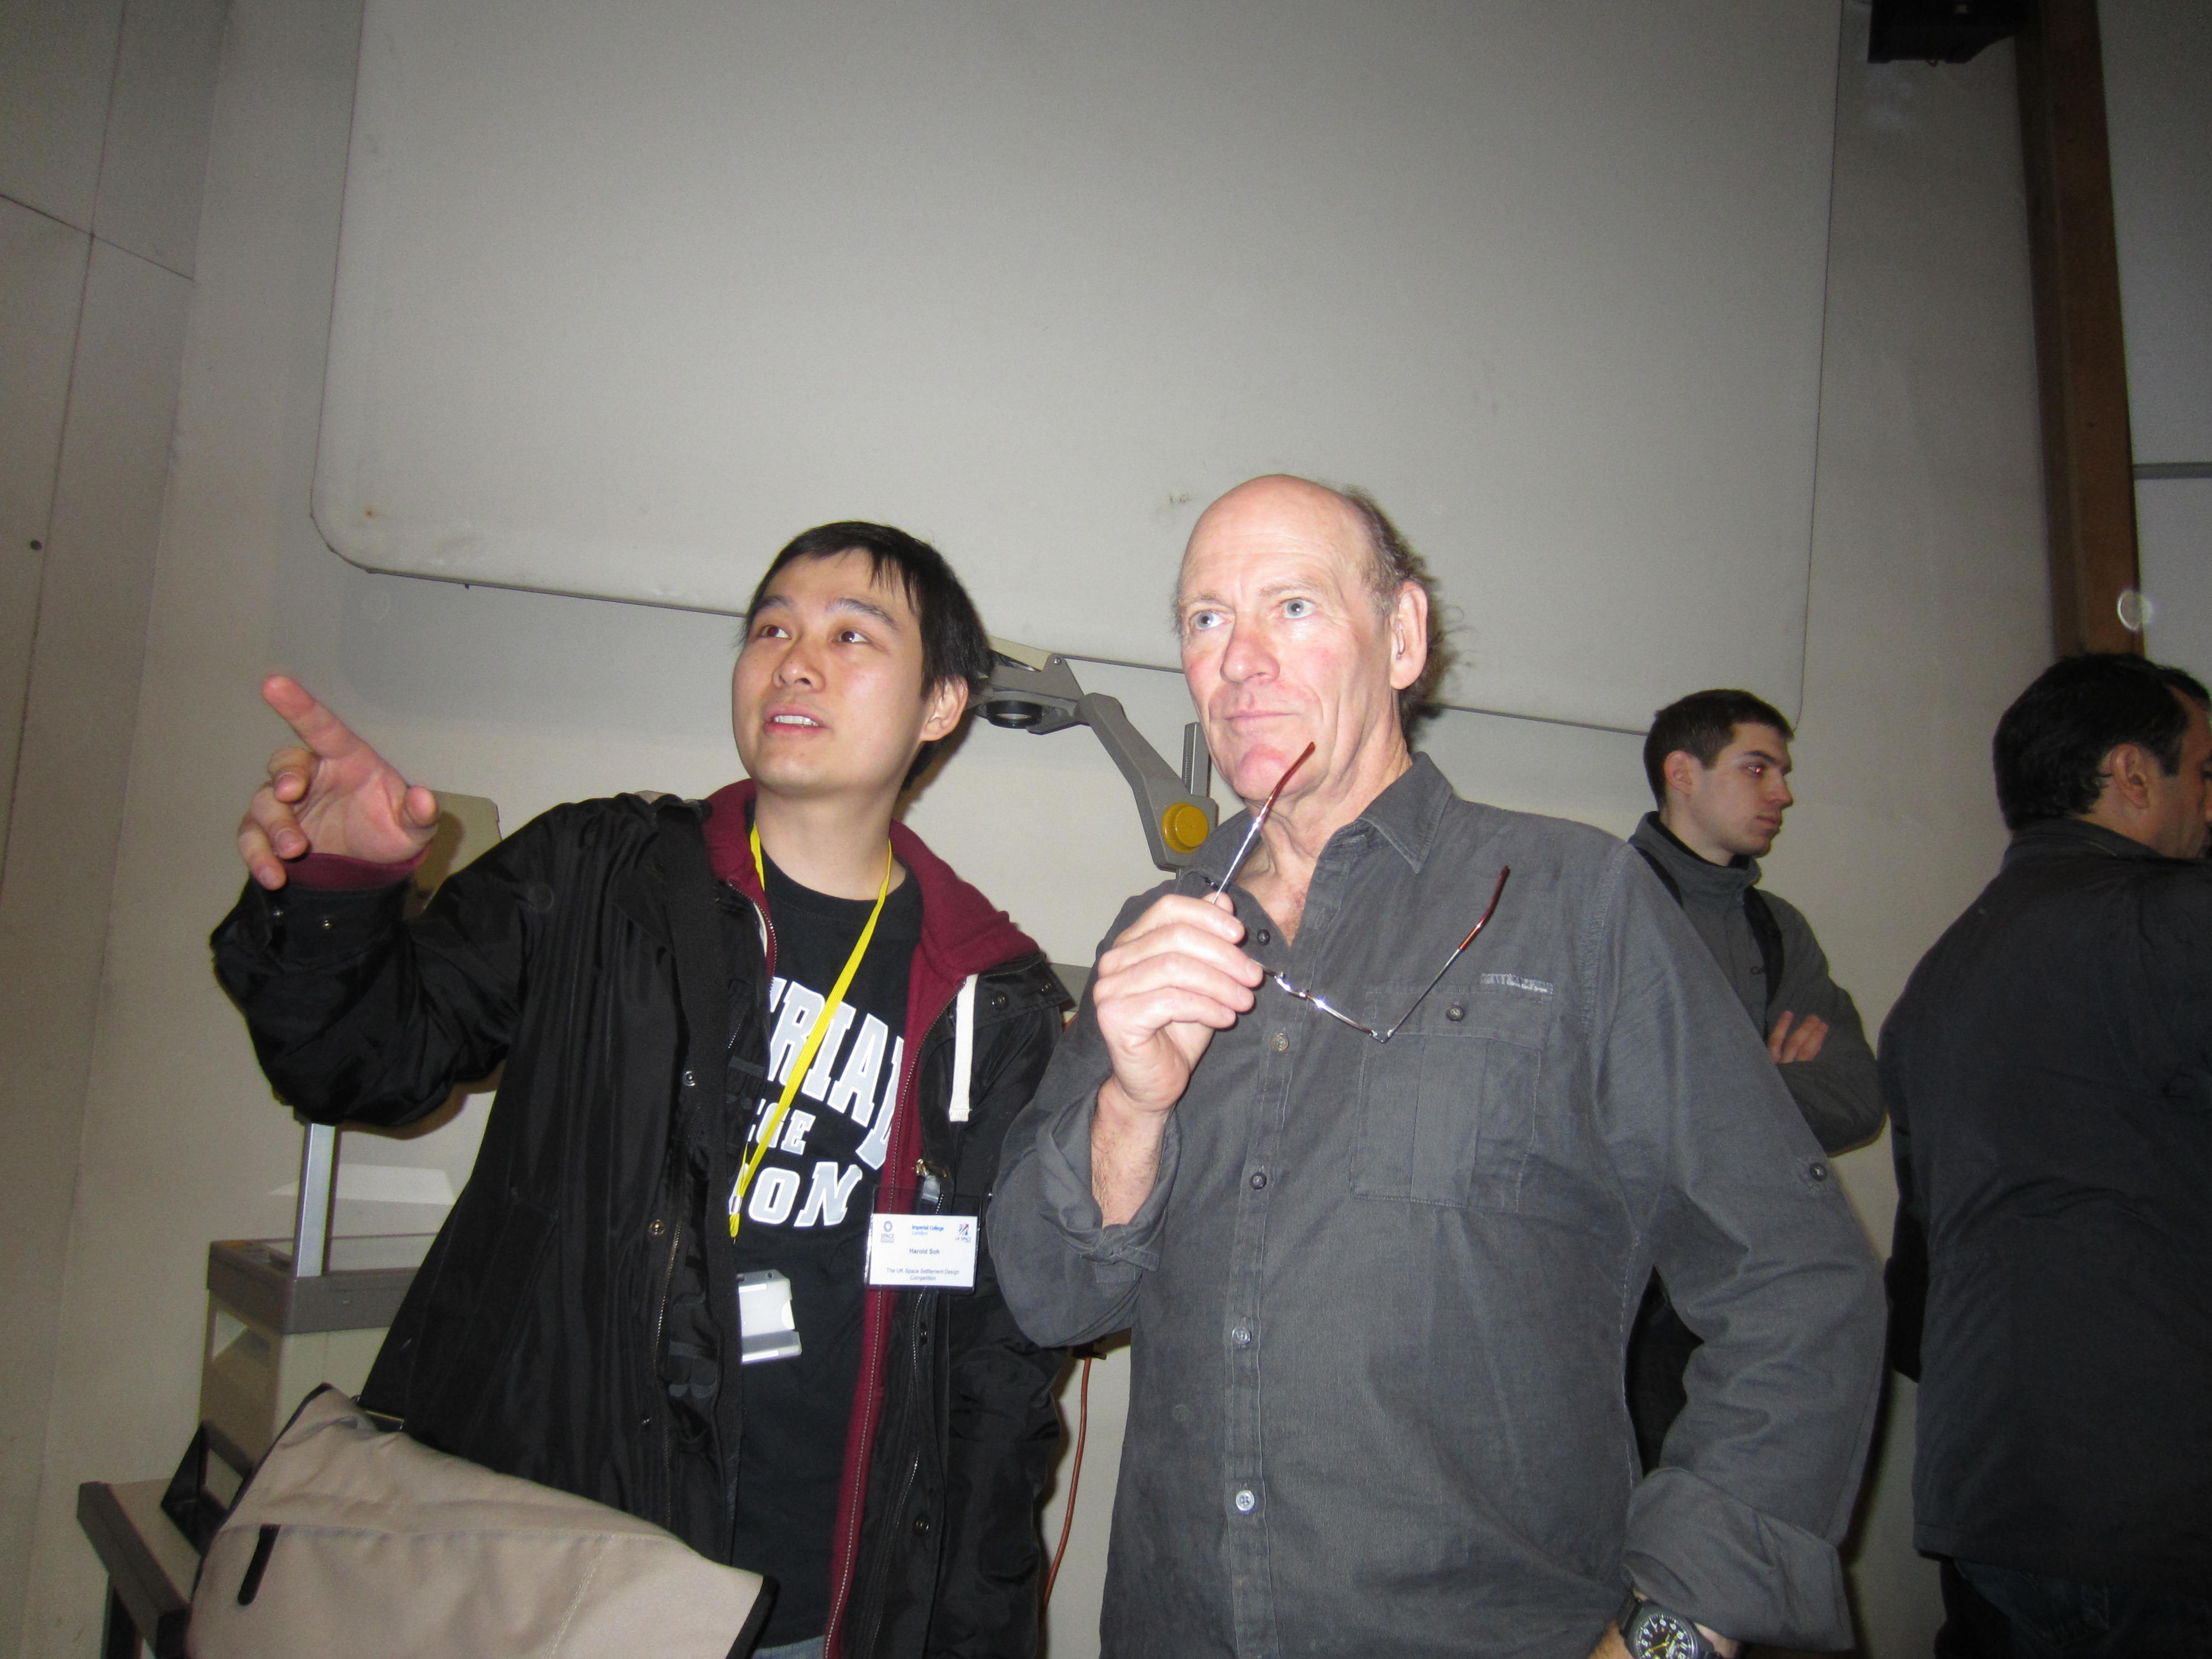 Harold Soh and Randall at the UK Space Design Competition London, UK.